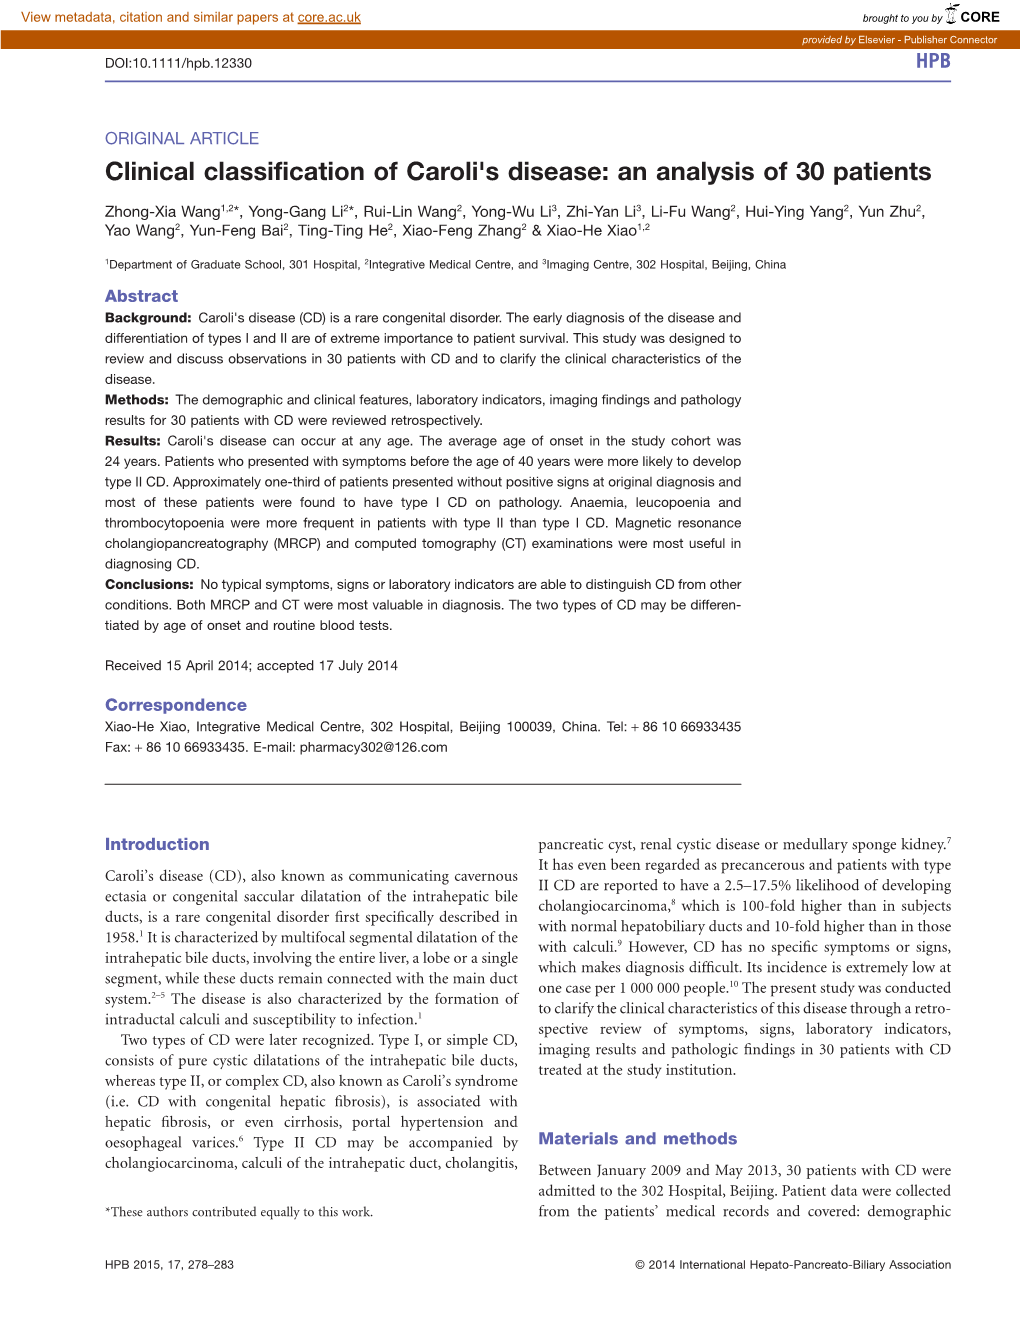 Clinical Classification of Caroli's Disease: an Analysis of 30 Patients